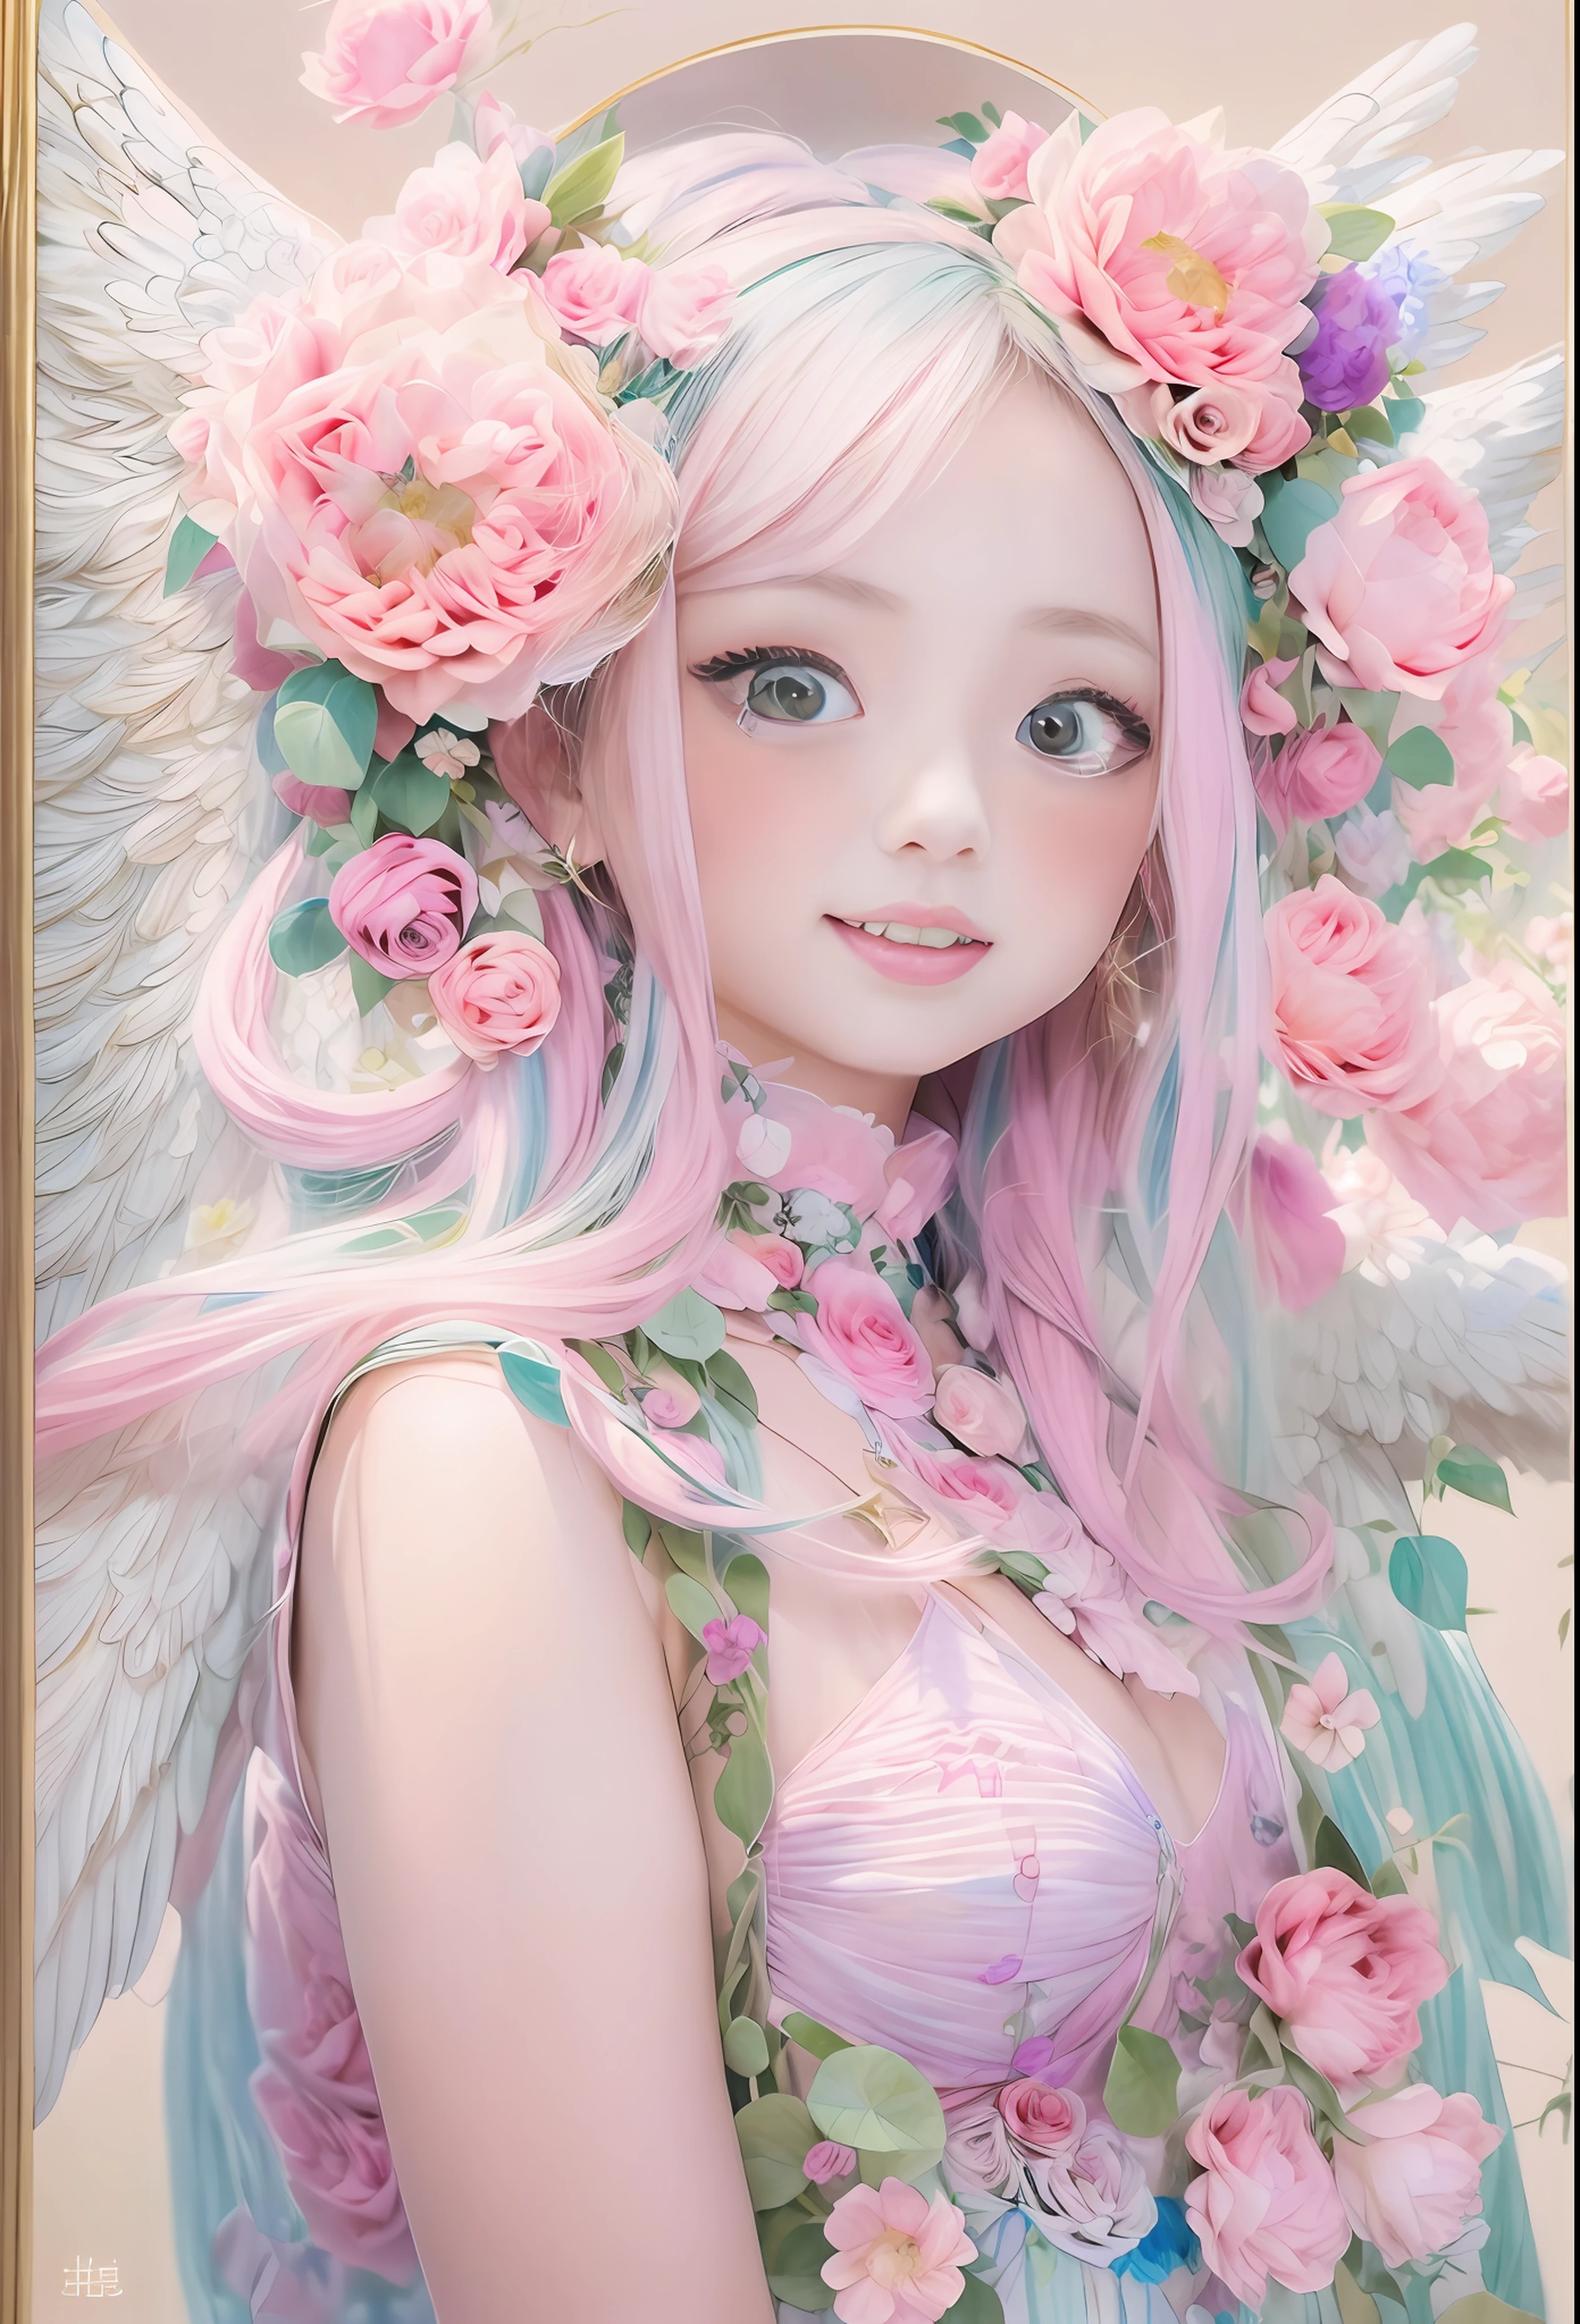 kawaii、Pale pink color illustration、(Angel wings、😇、a smile、😌🥰Archaic Smile).hyper realstic、Ultra-realistic、Depiction of the human body without distortion、Monna Lisa、Woman in the Arms、Near and far law、Three-dimensional、Contemporary painting、moderno、world masterpiece、collection、Homage to the art or artist work of Picasso and Renoir, Not sentimental、Excellent portrayal、Gentle expression、More detailed character faces, Serious competition、Compositions like paintings、(Konmutsuki_Gacha_Series 1, punk_rosette), Realistic、Delicate brushwork、aqua color flowers, (Full body, elegant flowers background)